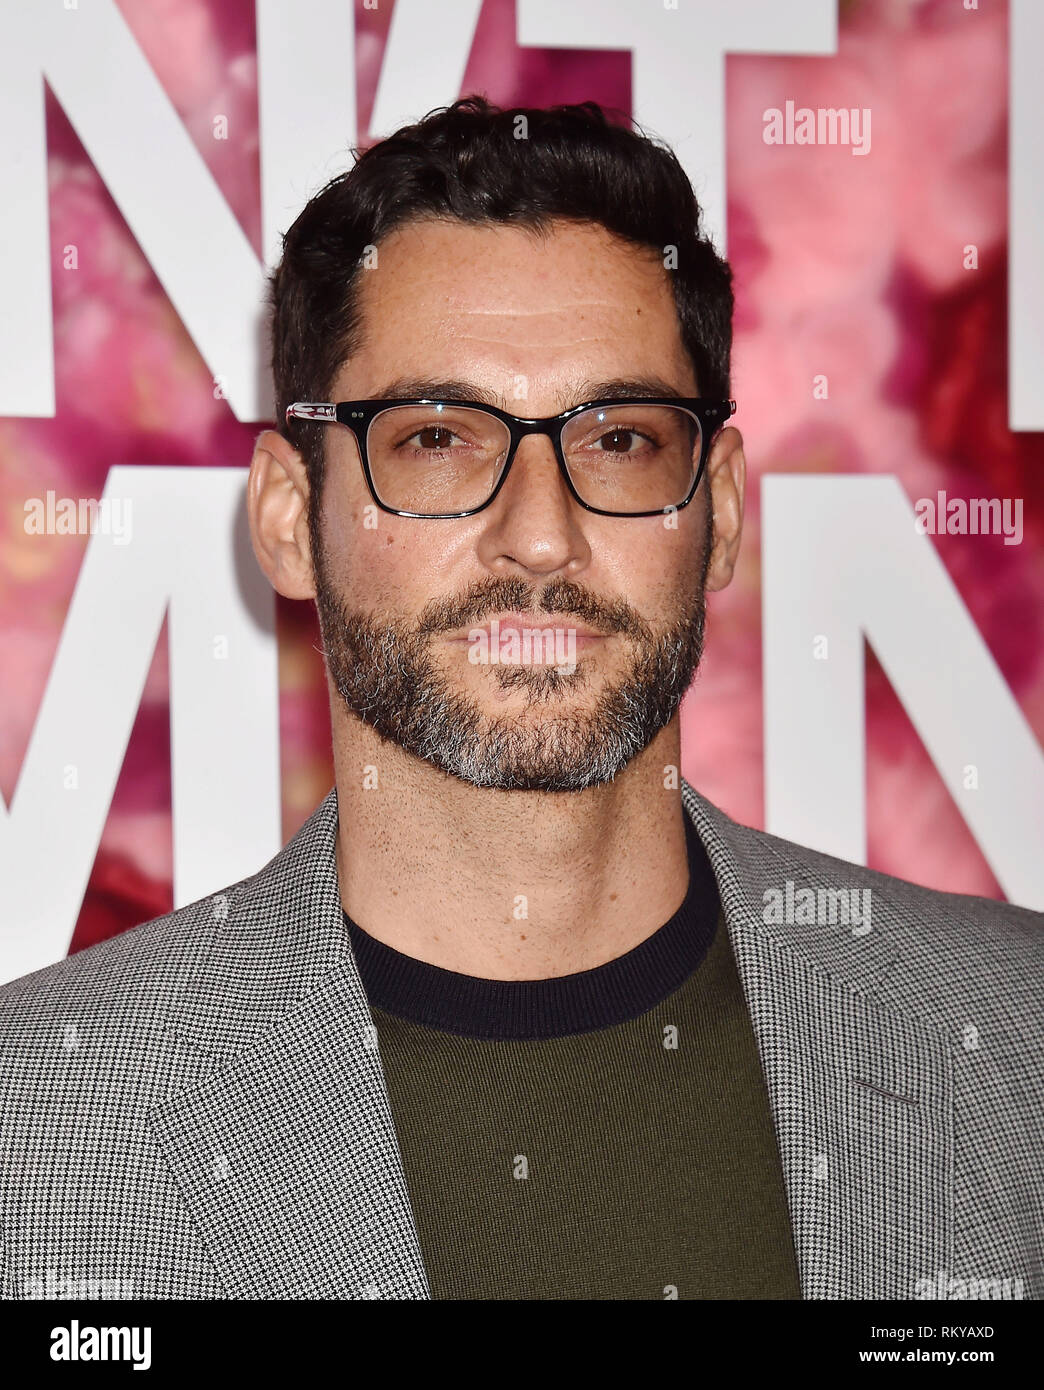 LOS ANGELES, CA - FEBRUARY 11: Tom Ellis arrives at the Premiere Of Warner Bros. Pictures' 'Isn't It Romantic' at The Theatre at Ace Hotel on February Stock Photo